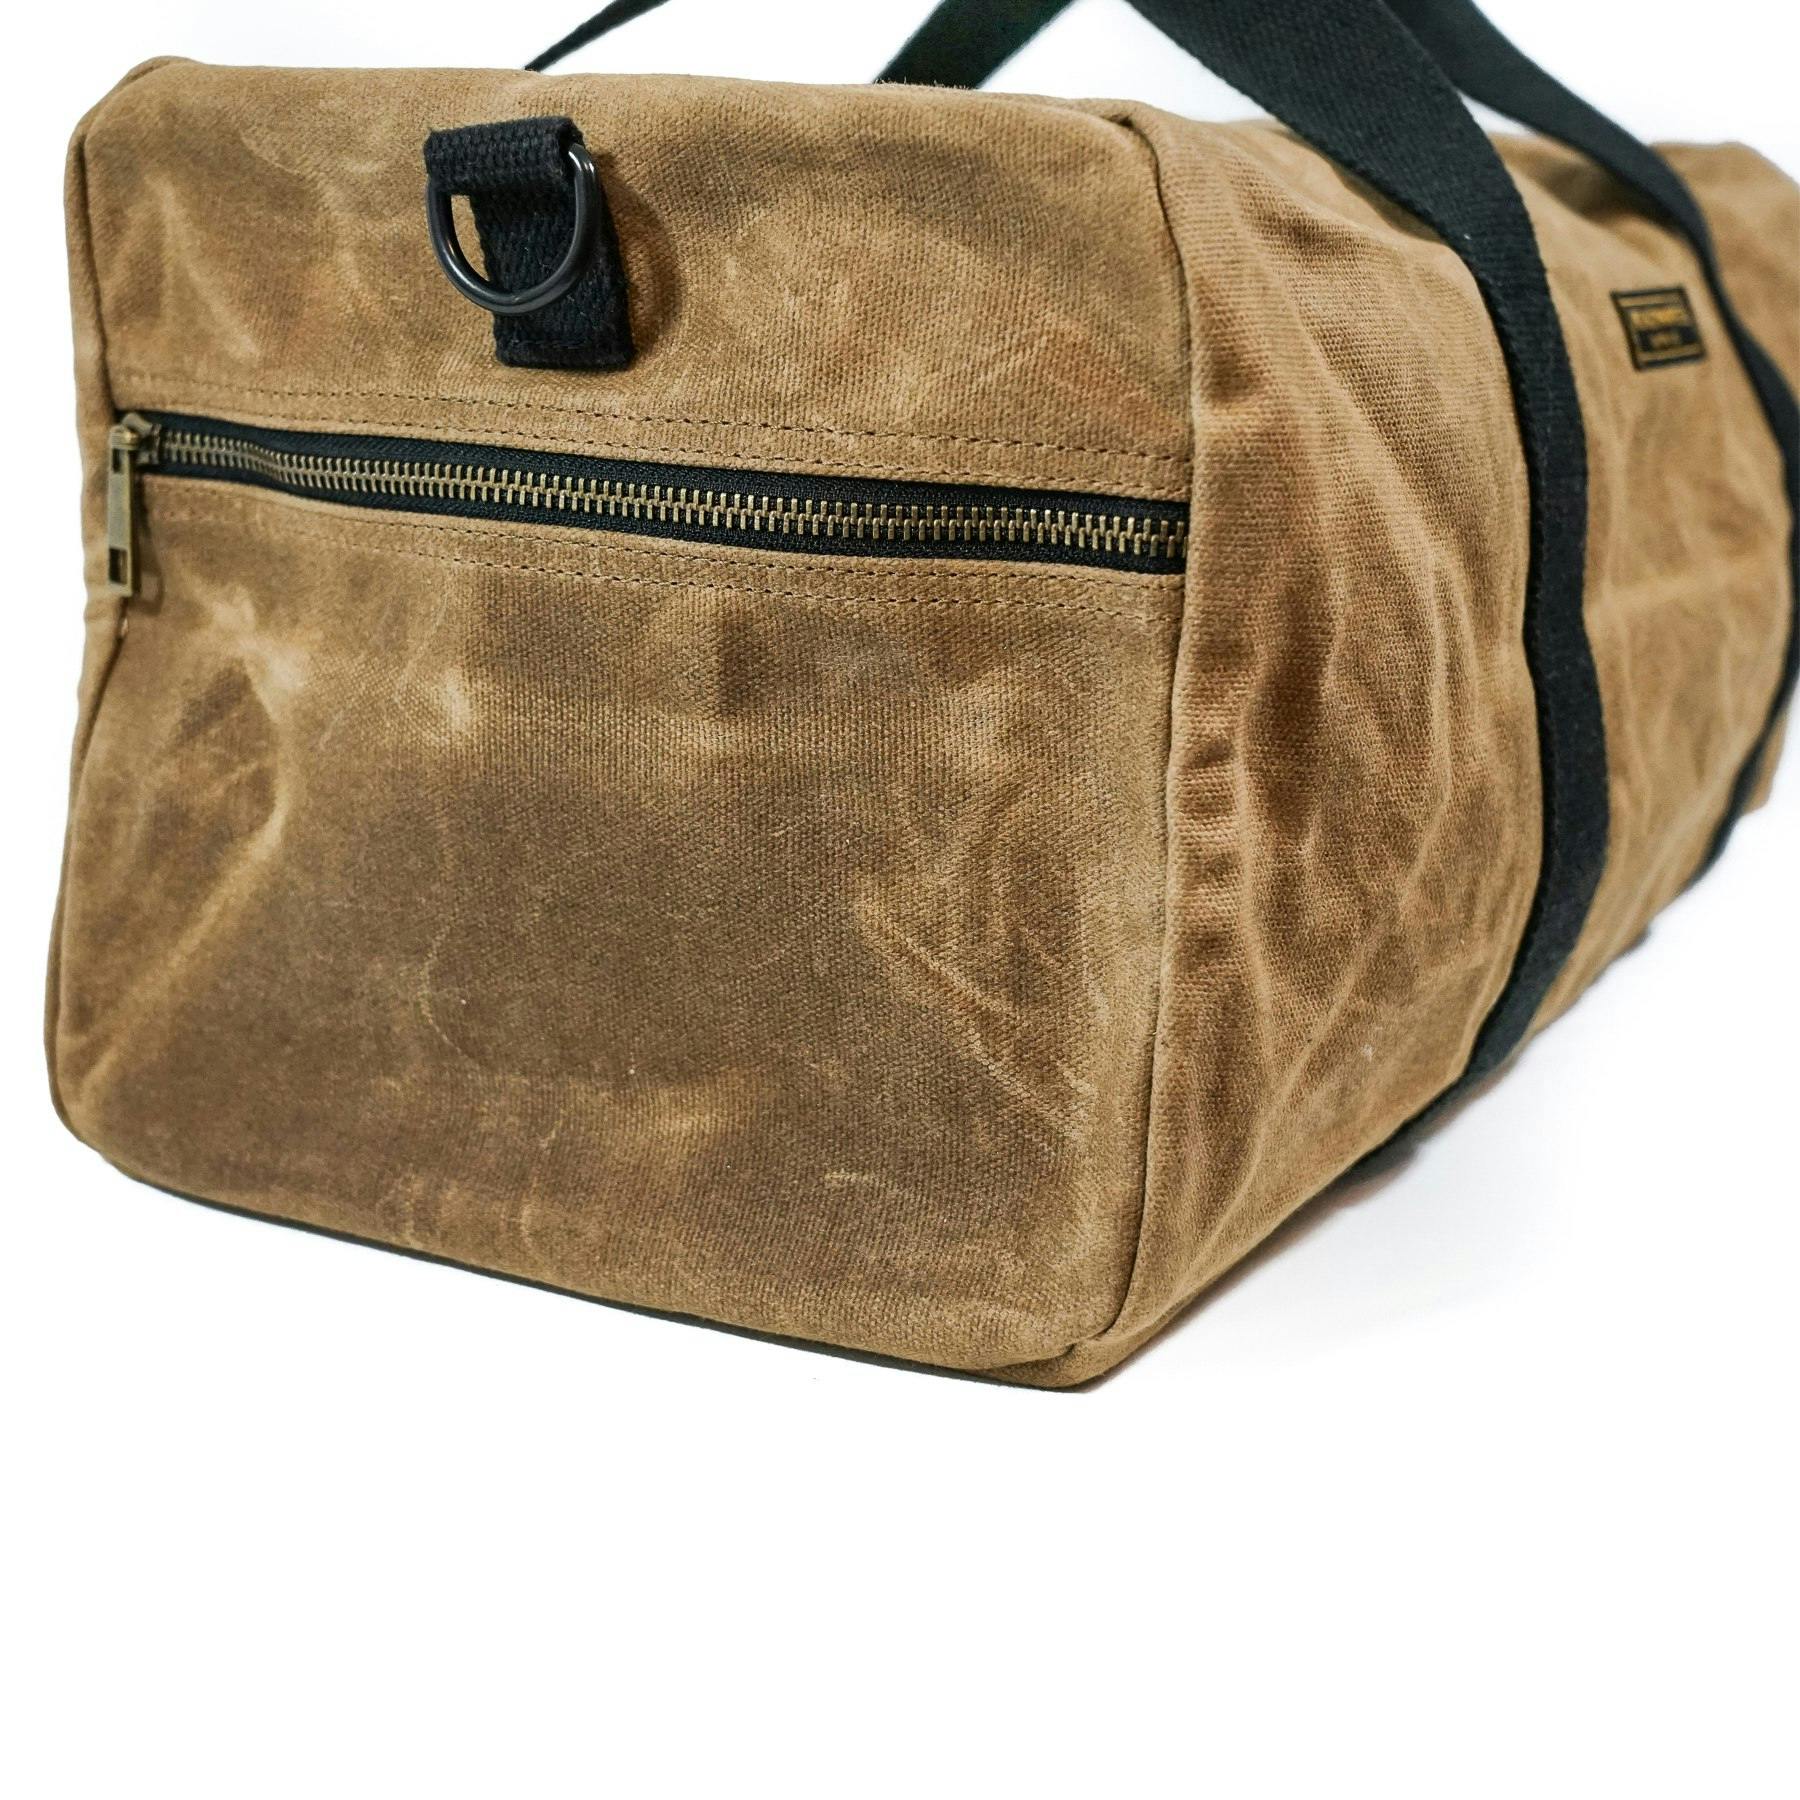 Huckberry Readywares Waxed Canvas Duffel Bag features high-quality